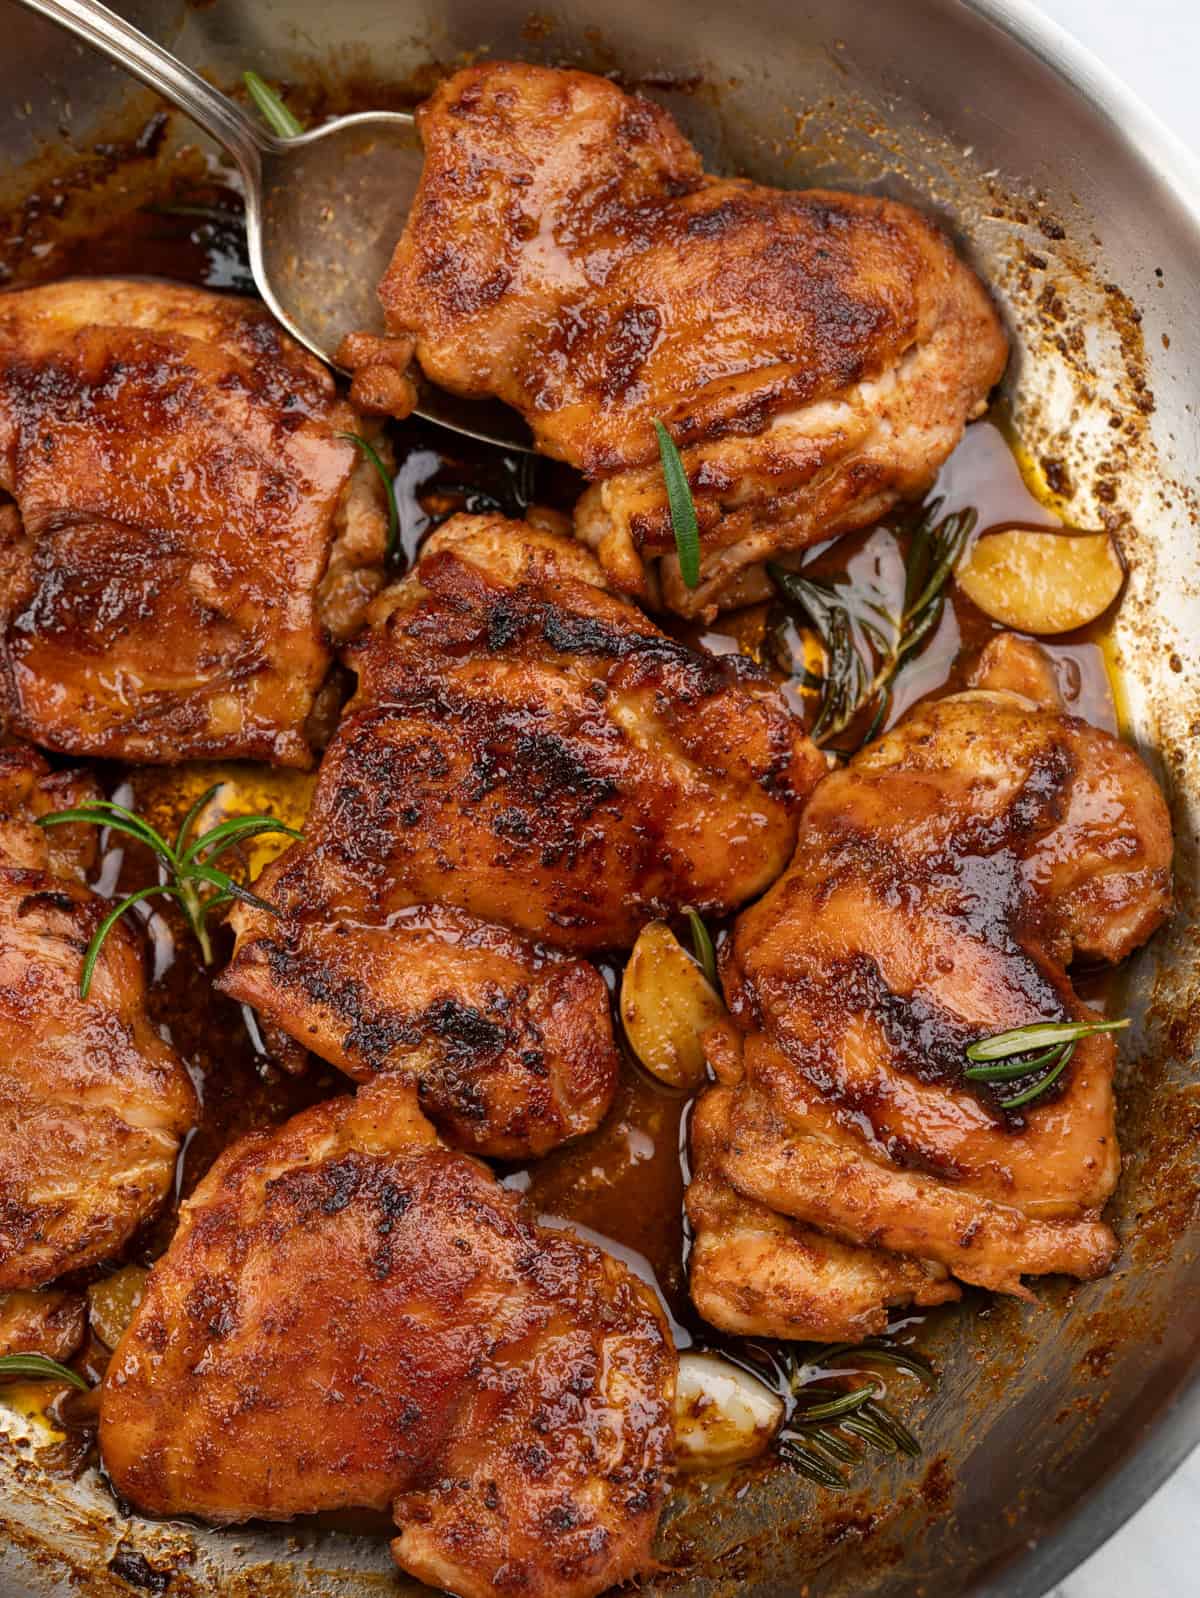 Boneless chicken thighs in a buttery sweet and spicy sauce flavoured with rosemary.